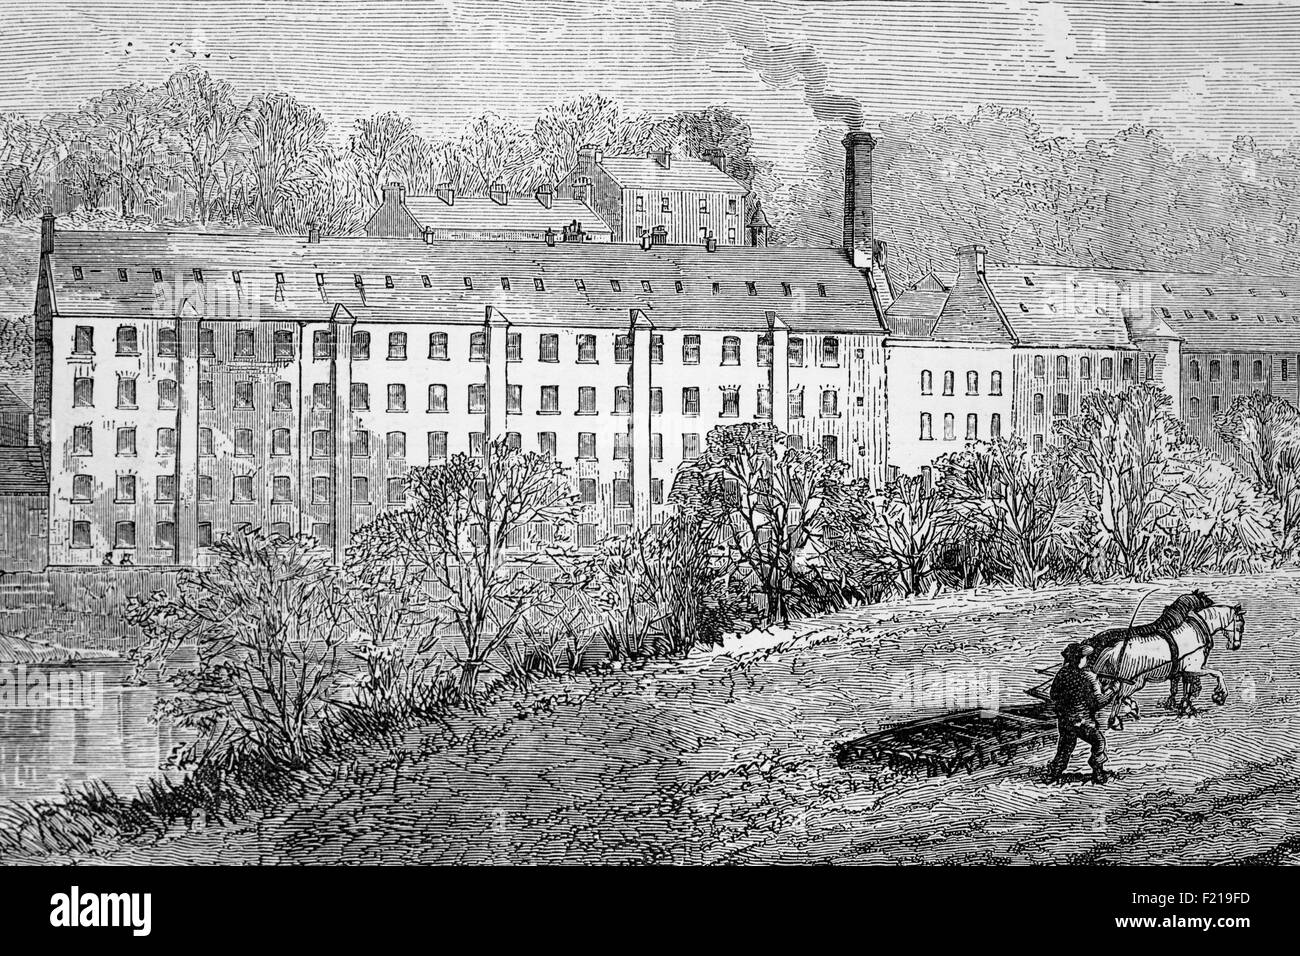 Blantyre Cotton Mill on the banks of the River Clyde where the explorer David Livingstone (1813-1873) mother and father were among the 2000 people employed in the Cotton Mills some eight miles south east of Glasgow, South Lanarkshire, Scotland. Livingstone (1813-1873)went on to become a Scottish Congregationalist pioneer medical missionary with the London Missionary Society. He became one of the most famous of the European missionaries and explorers who opened up the interior of Africa during the mid 1800s. Stock Photo